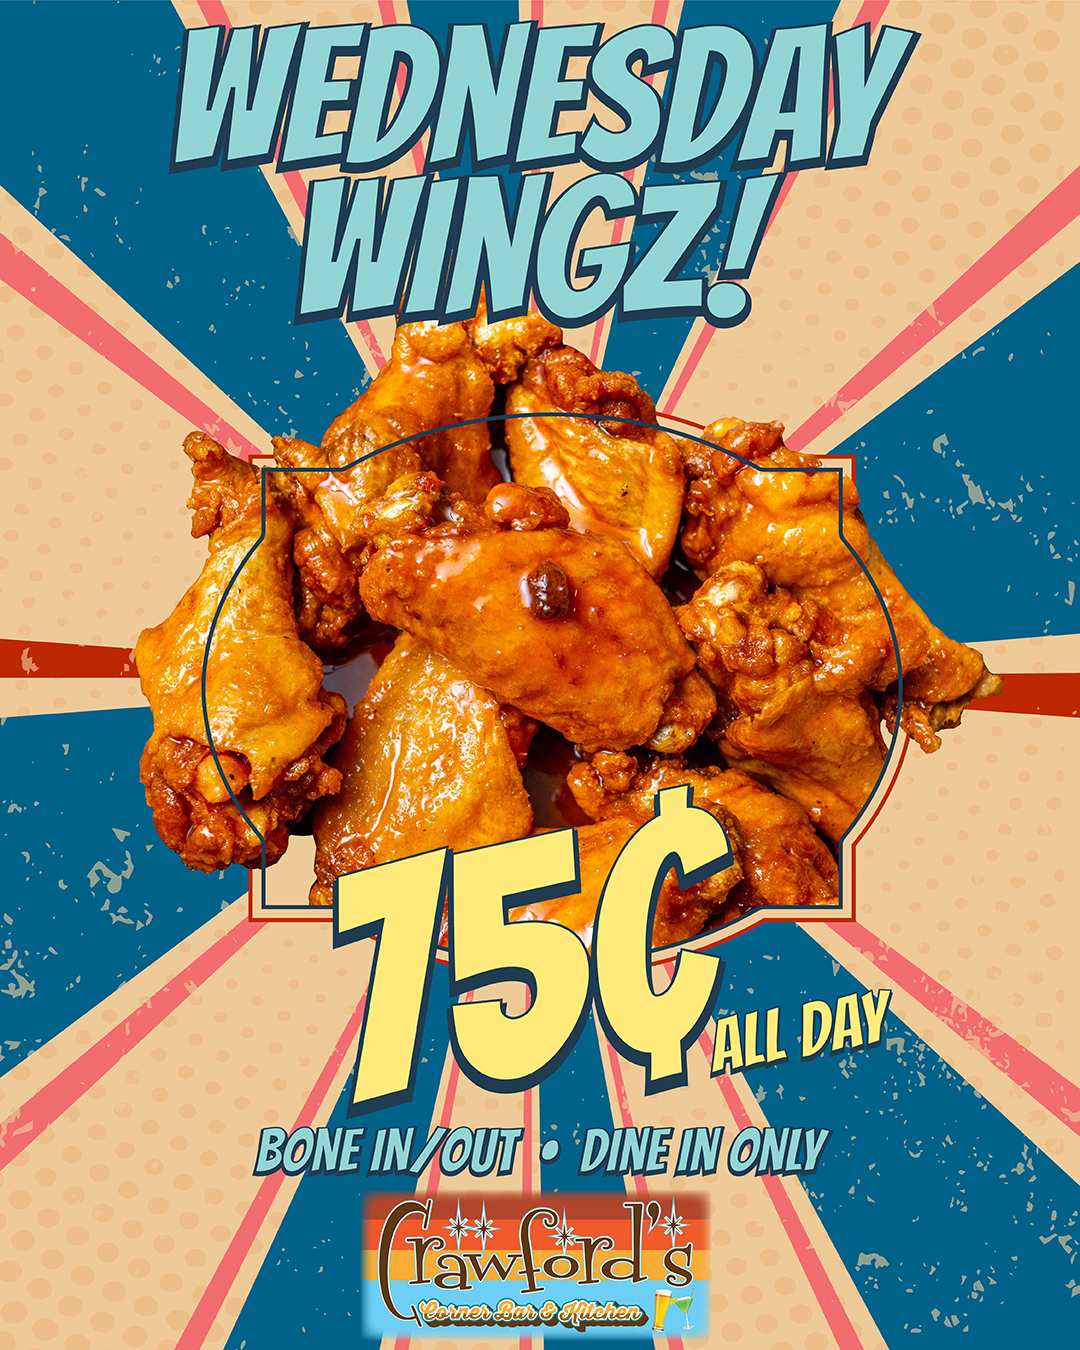 A poster for wednesday wings.